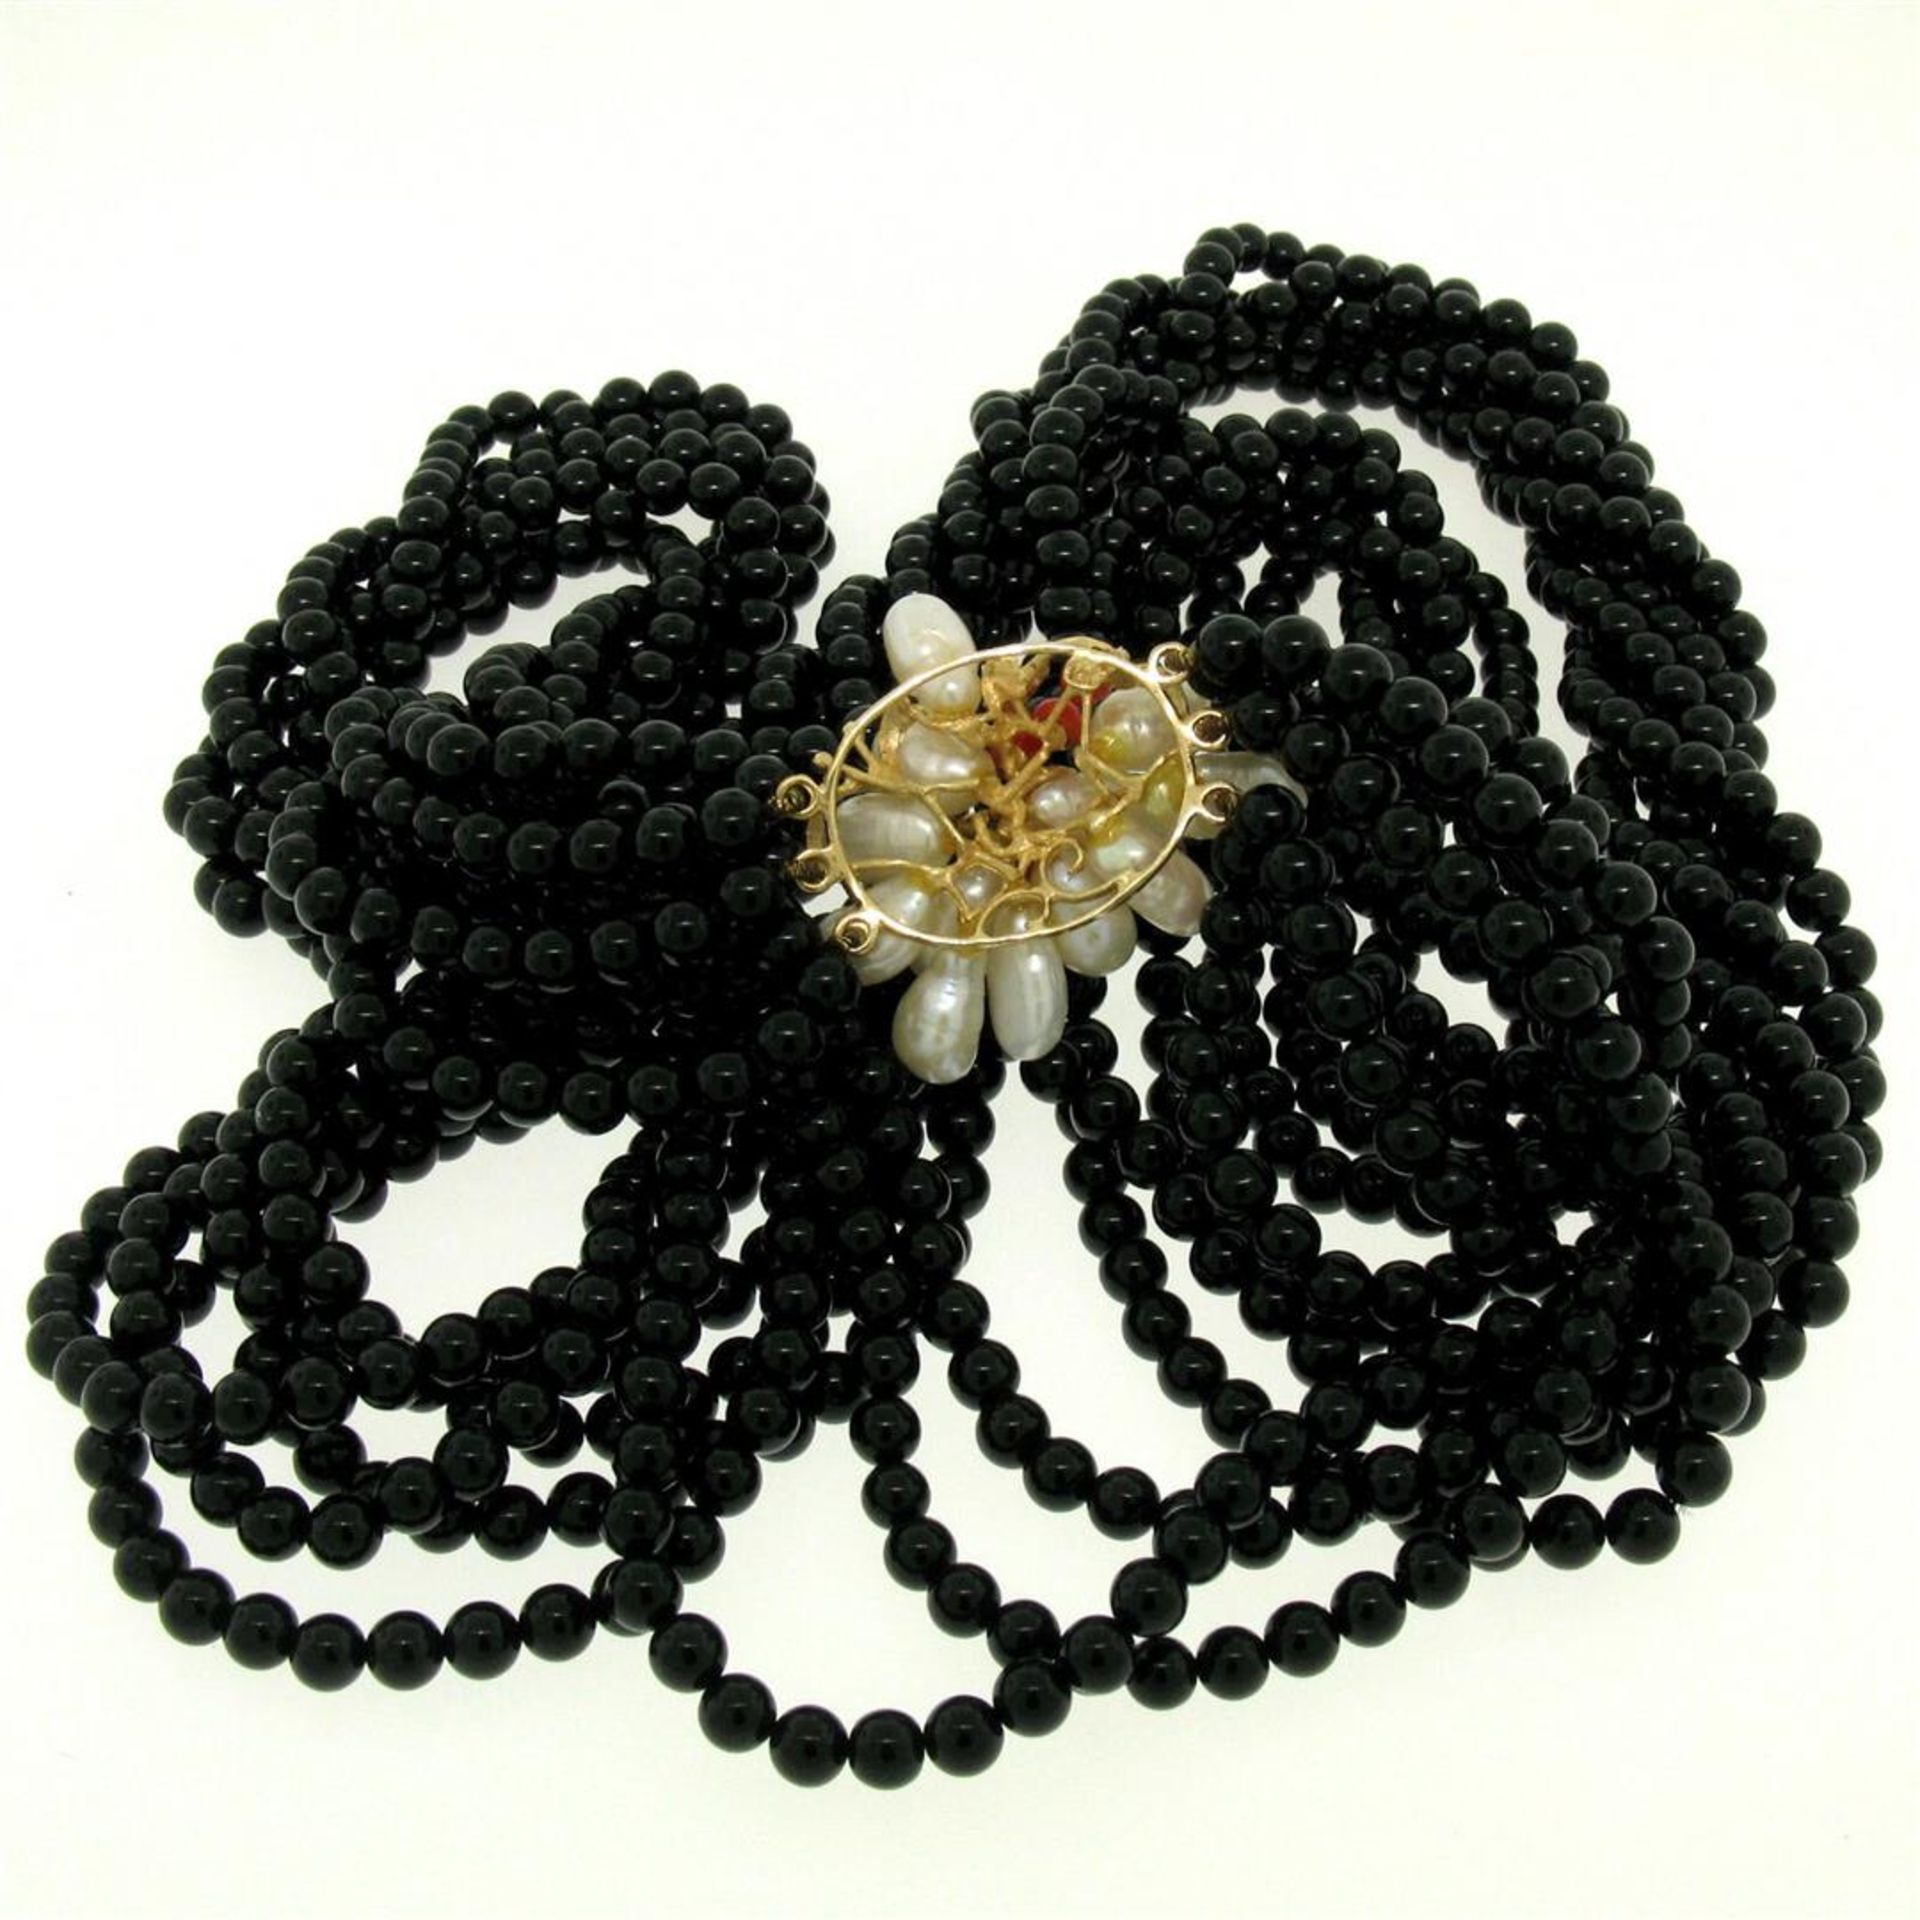 14k Gold Long Multi Strand Black Onyx Necklace w/ Freshwater Pearl & Coral Bead - Image 4 of 4